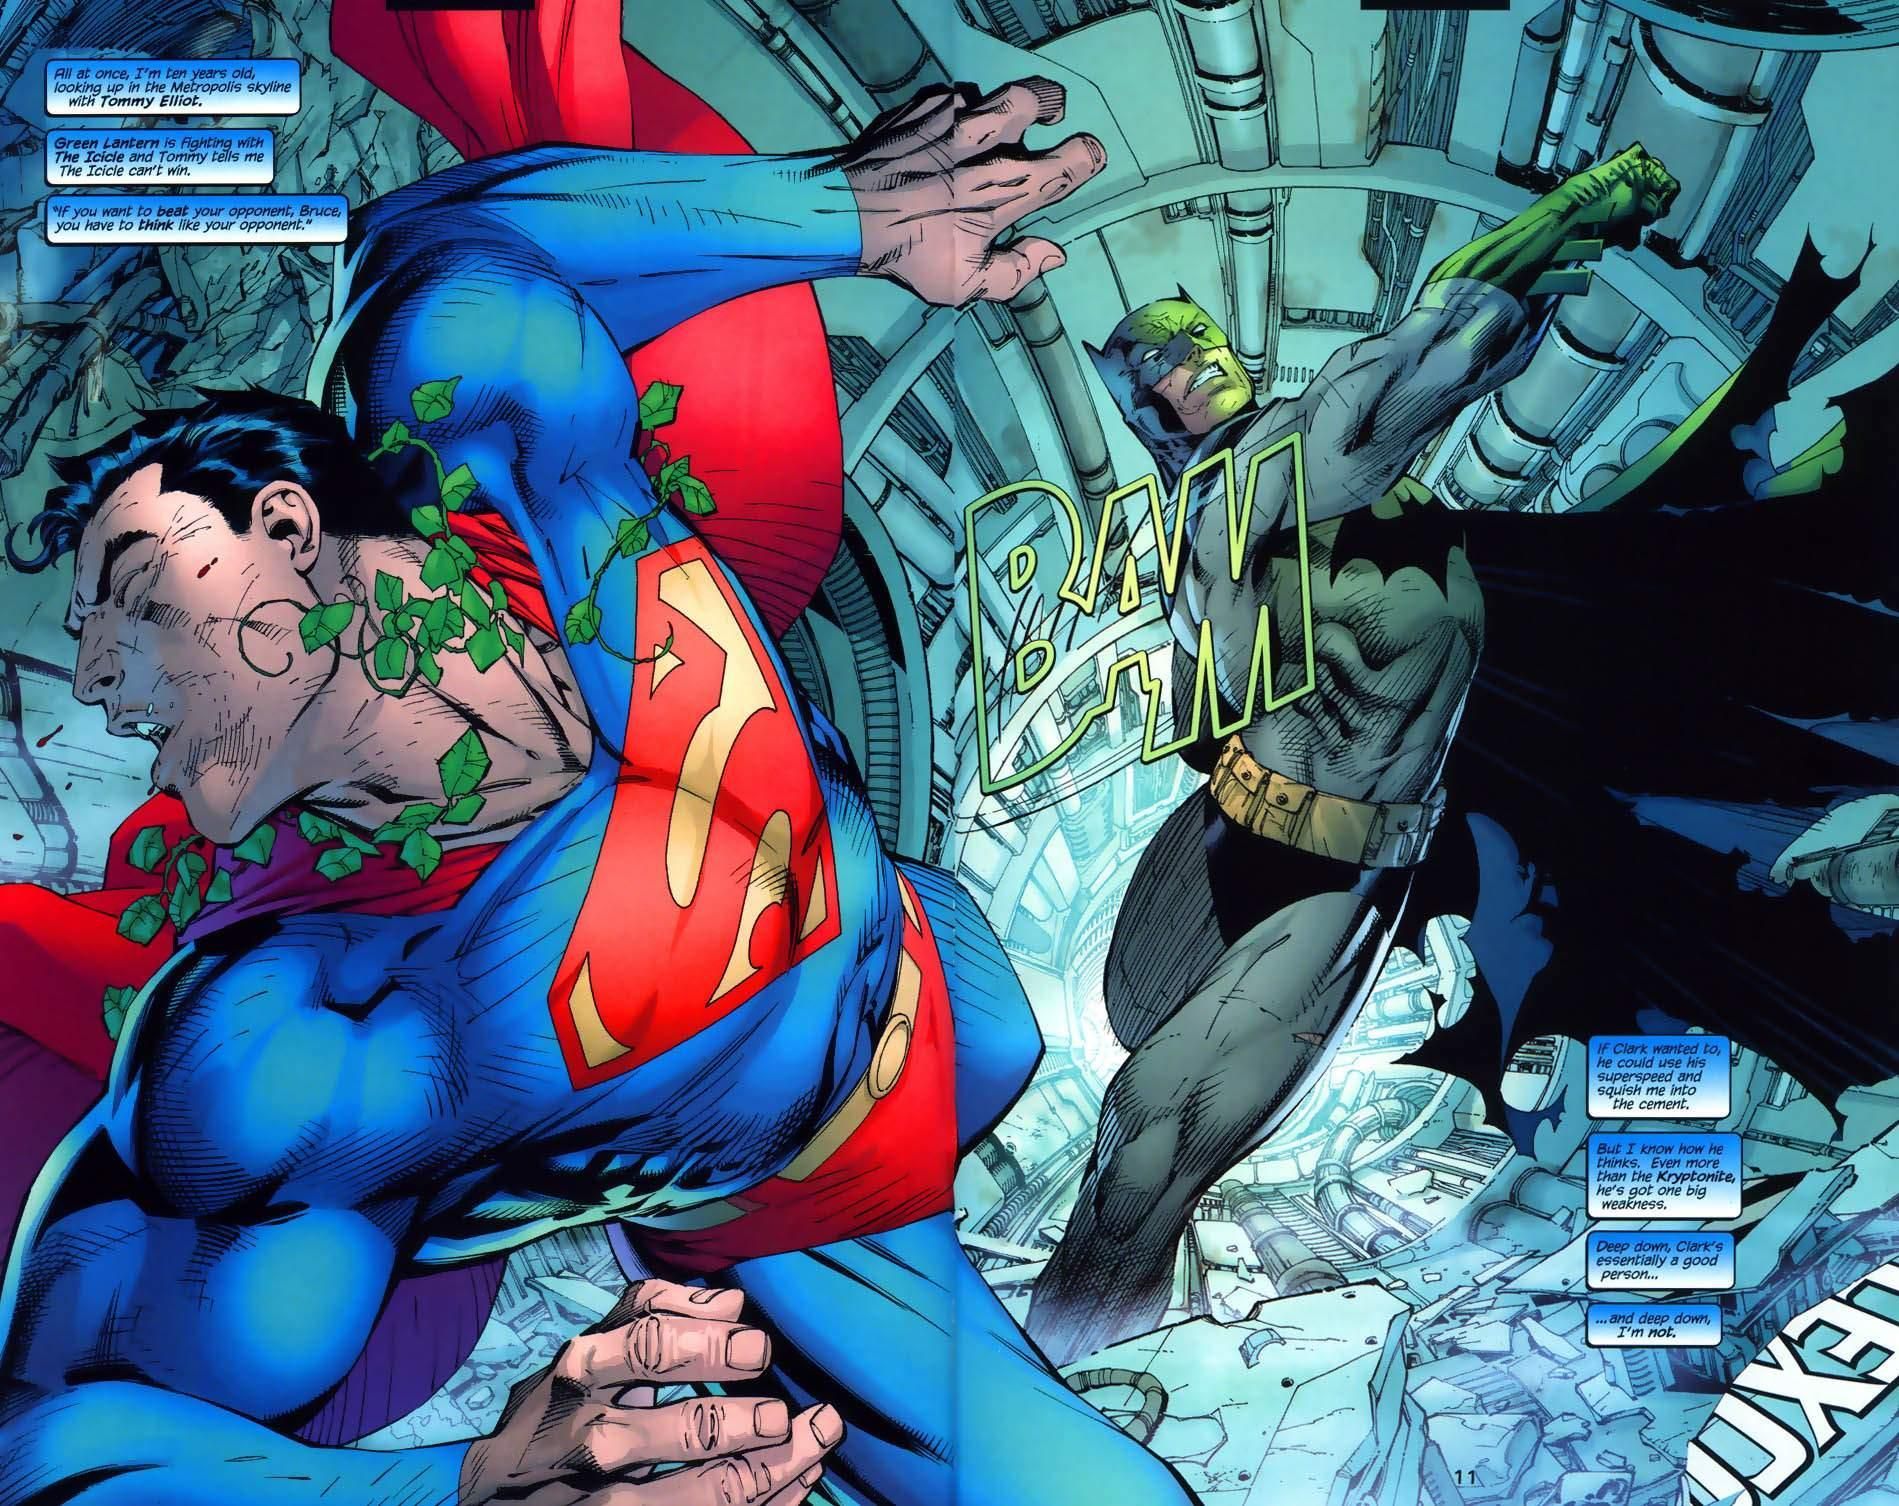 Jim Lee At His Finest. Getting The Dark Knight To Knock Out The Boy Scout. Batman And Superman, Batman Hush, Superman Comic